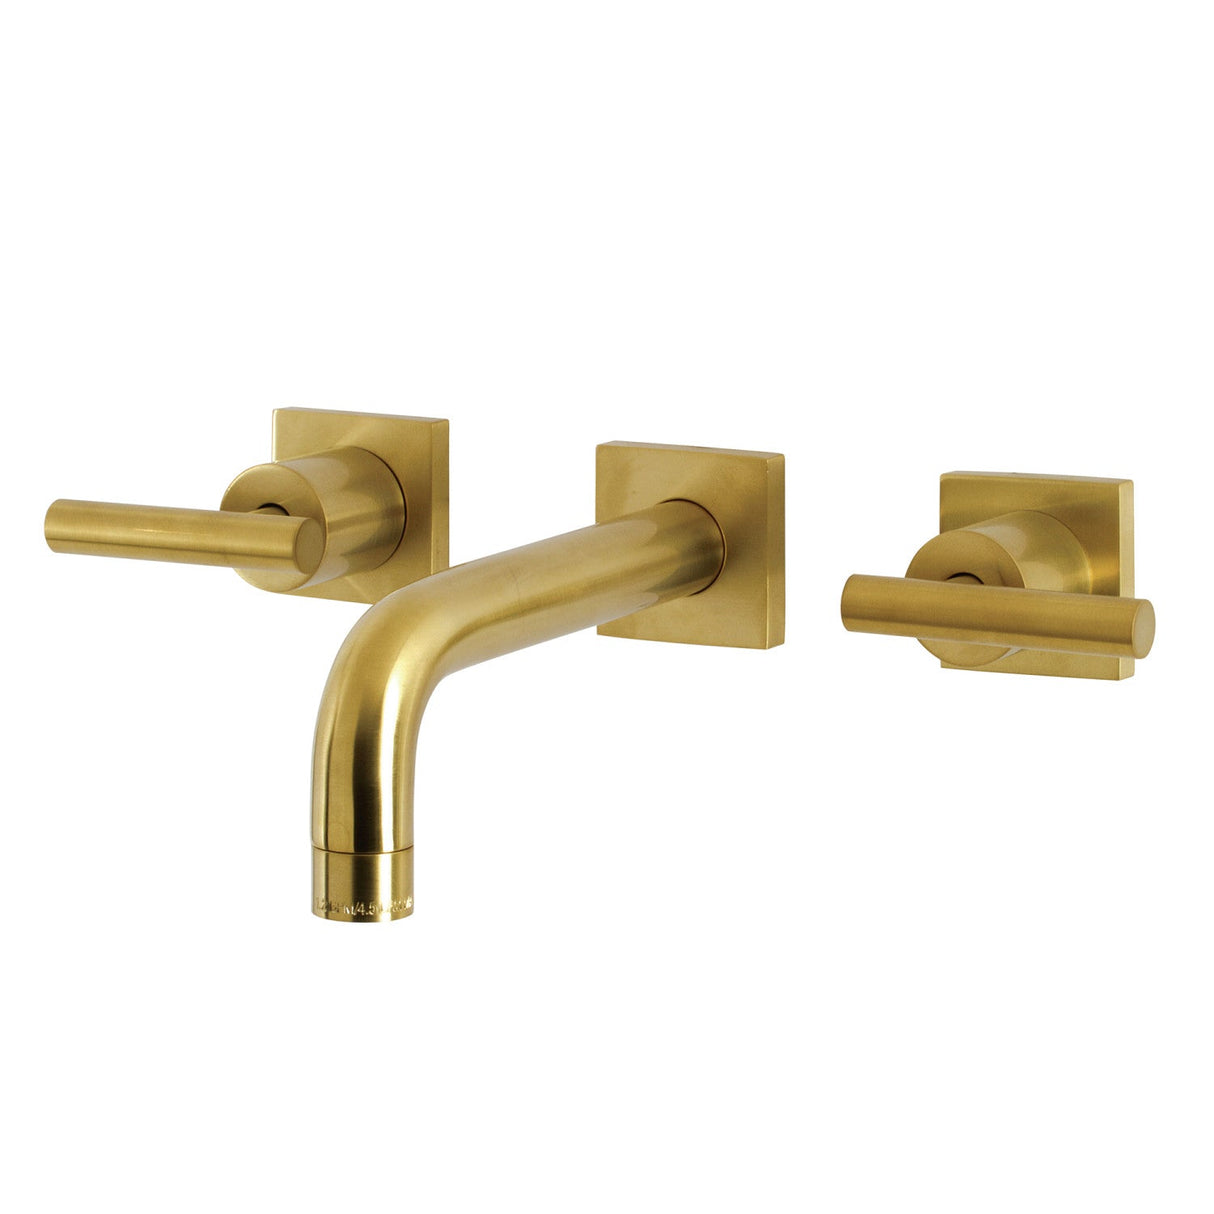 Manhattan KS6127CML Two-Handle 3-Hole Wall Mount Bathroom Faucet, Brushed Brass